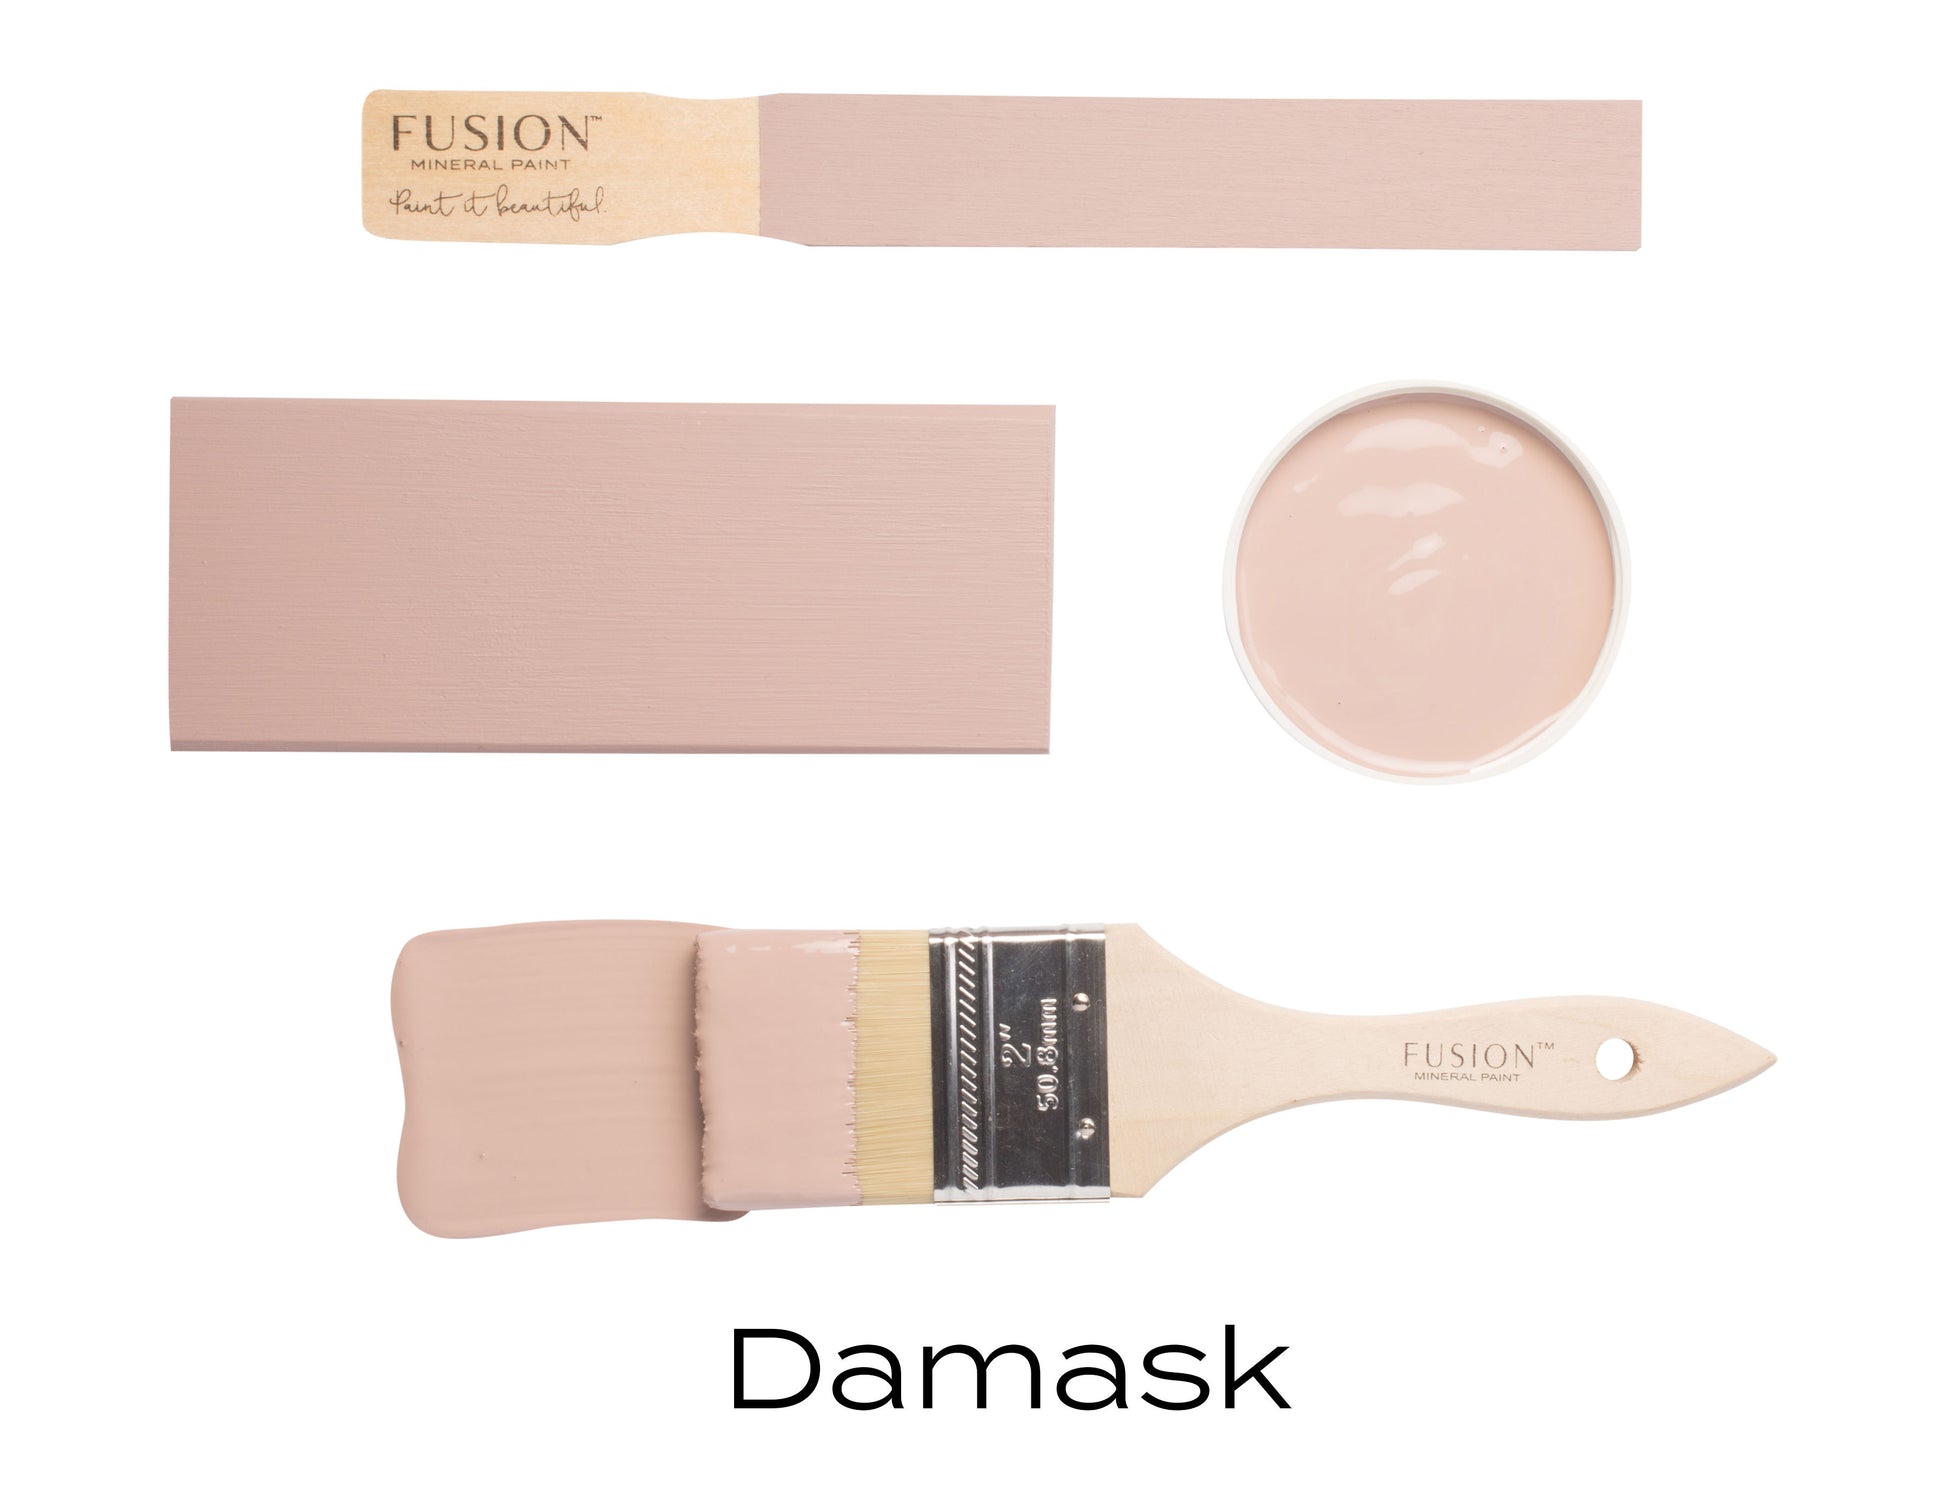 Fusion Mineral Paint - Damask - Rustic River Home